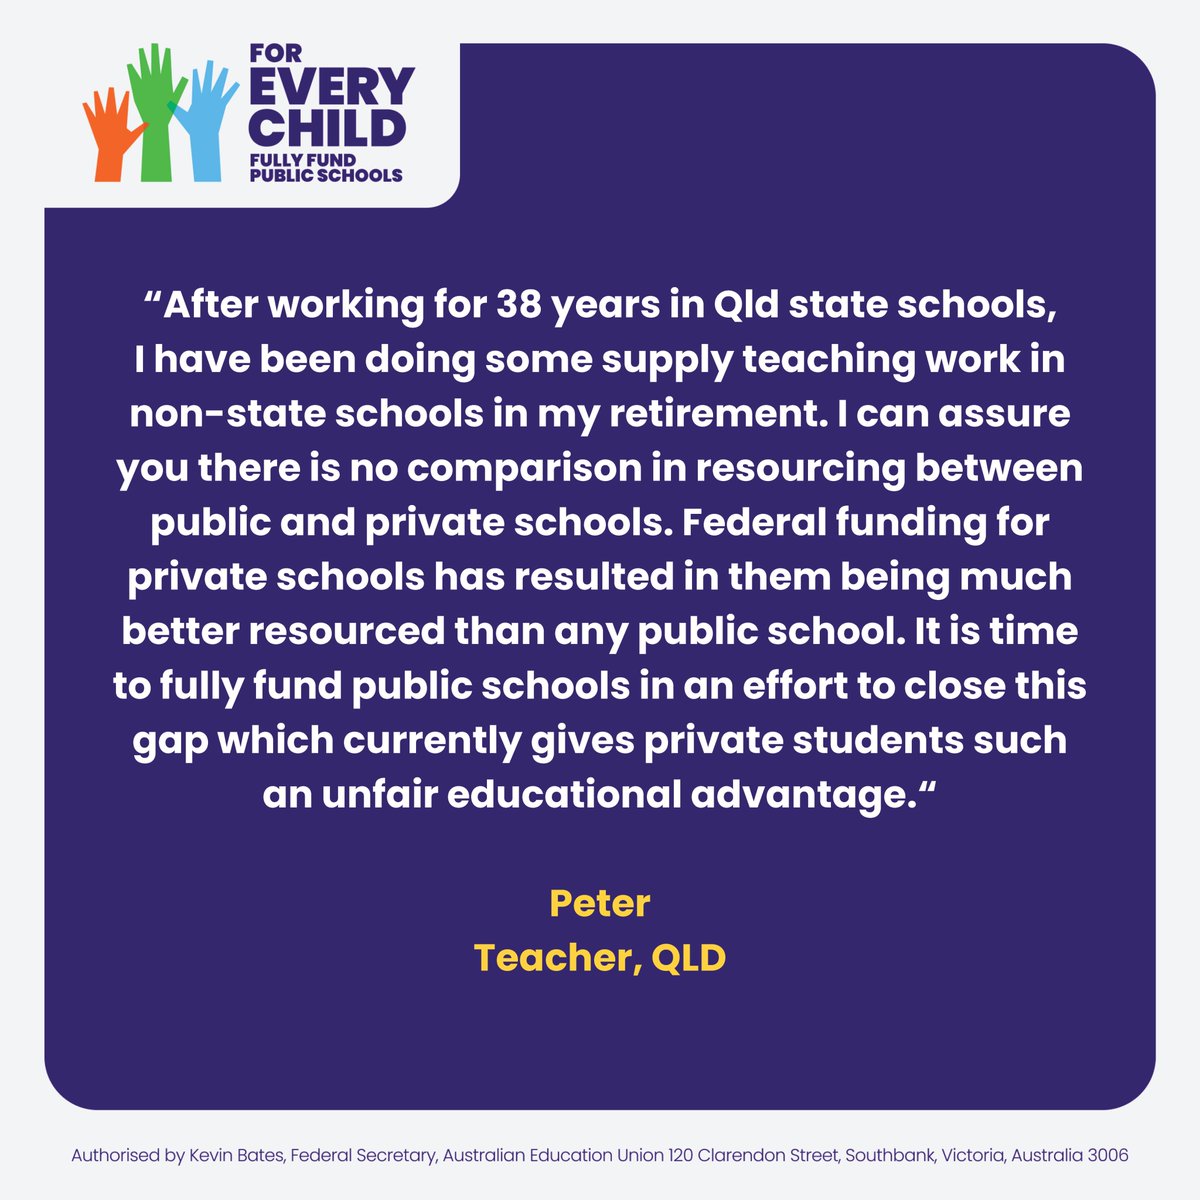 Australia has one of the most inequitable schooling systems in the world. If we want all children to have the same opportunities for success, governments must ensure that public schools are fully funded to cater to the needs of every student. #auspol @JasonClareMP @AlboMP